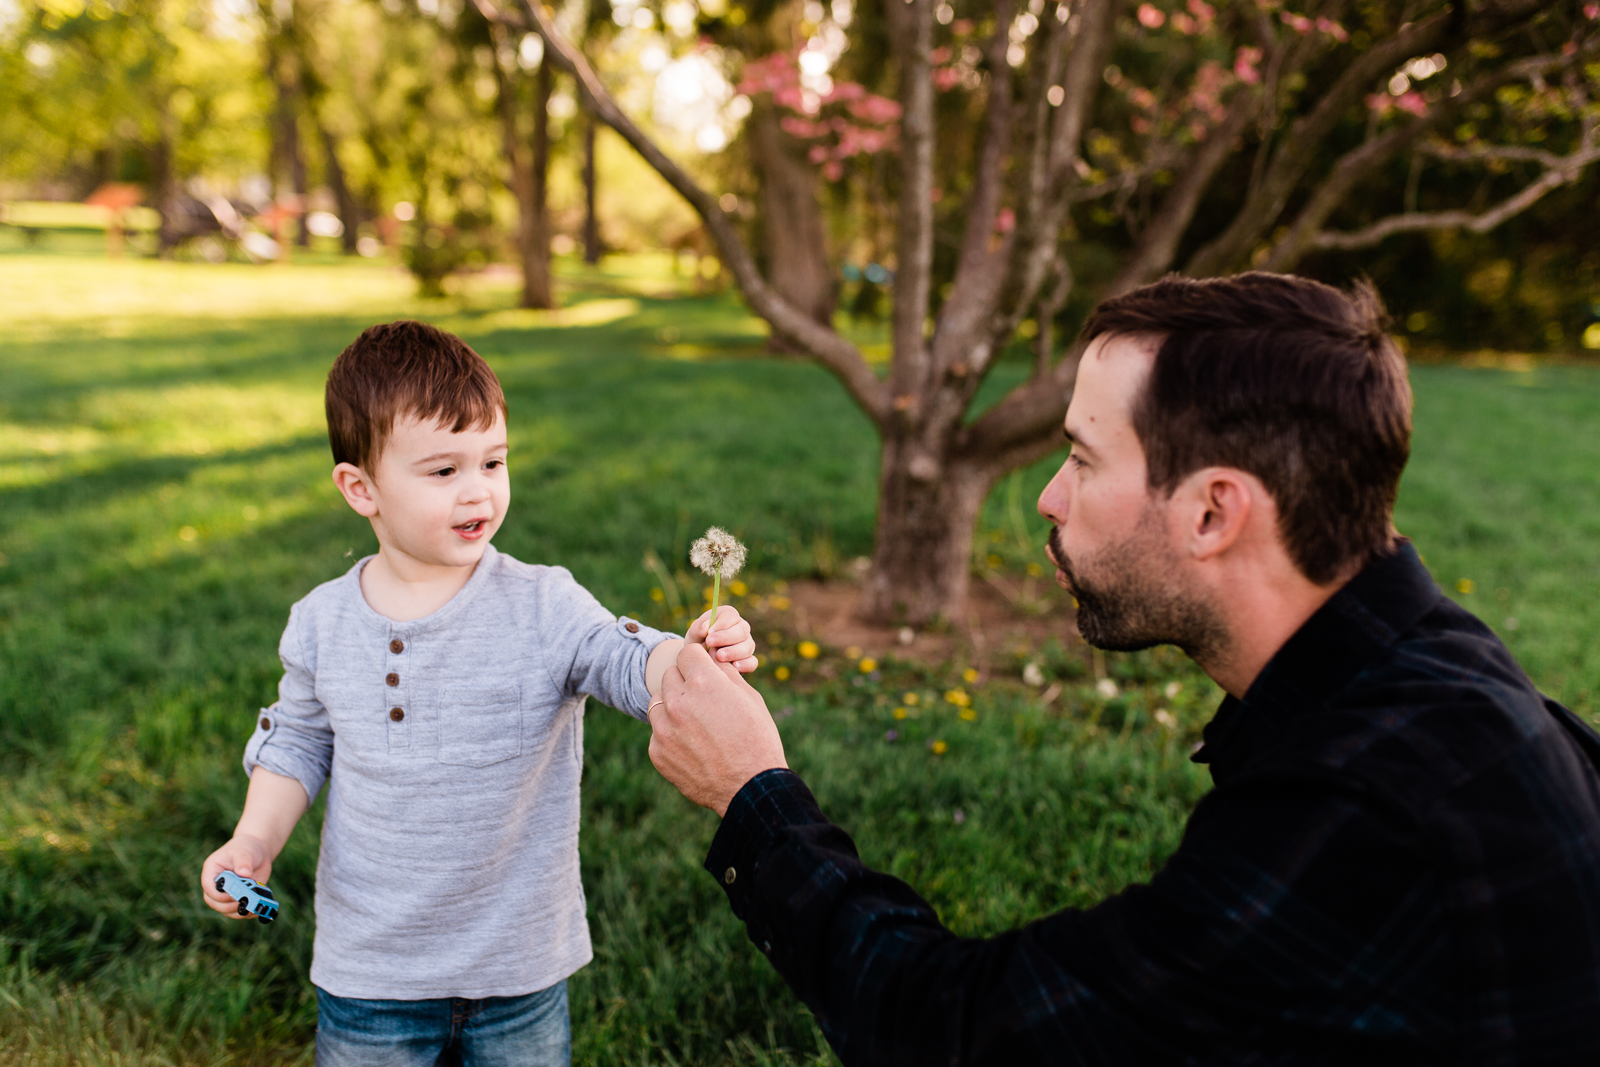  Father and son with dandelions, golden hour session at Loose park, mommy and me session, Kansas City family photographer, Rebecca Clair Photography 